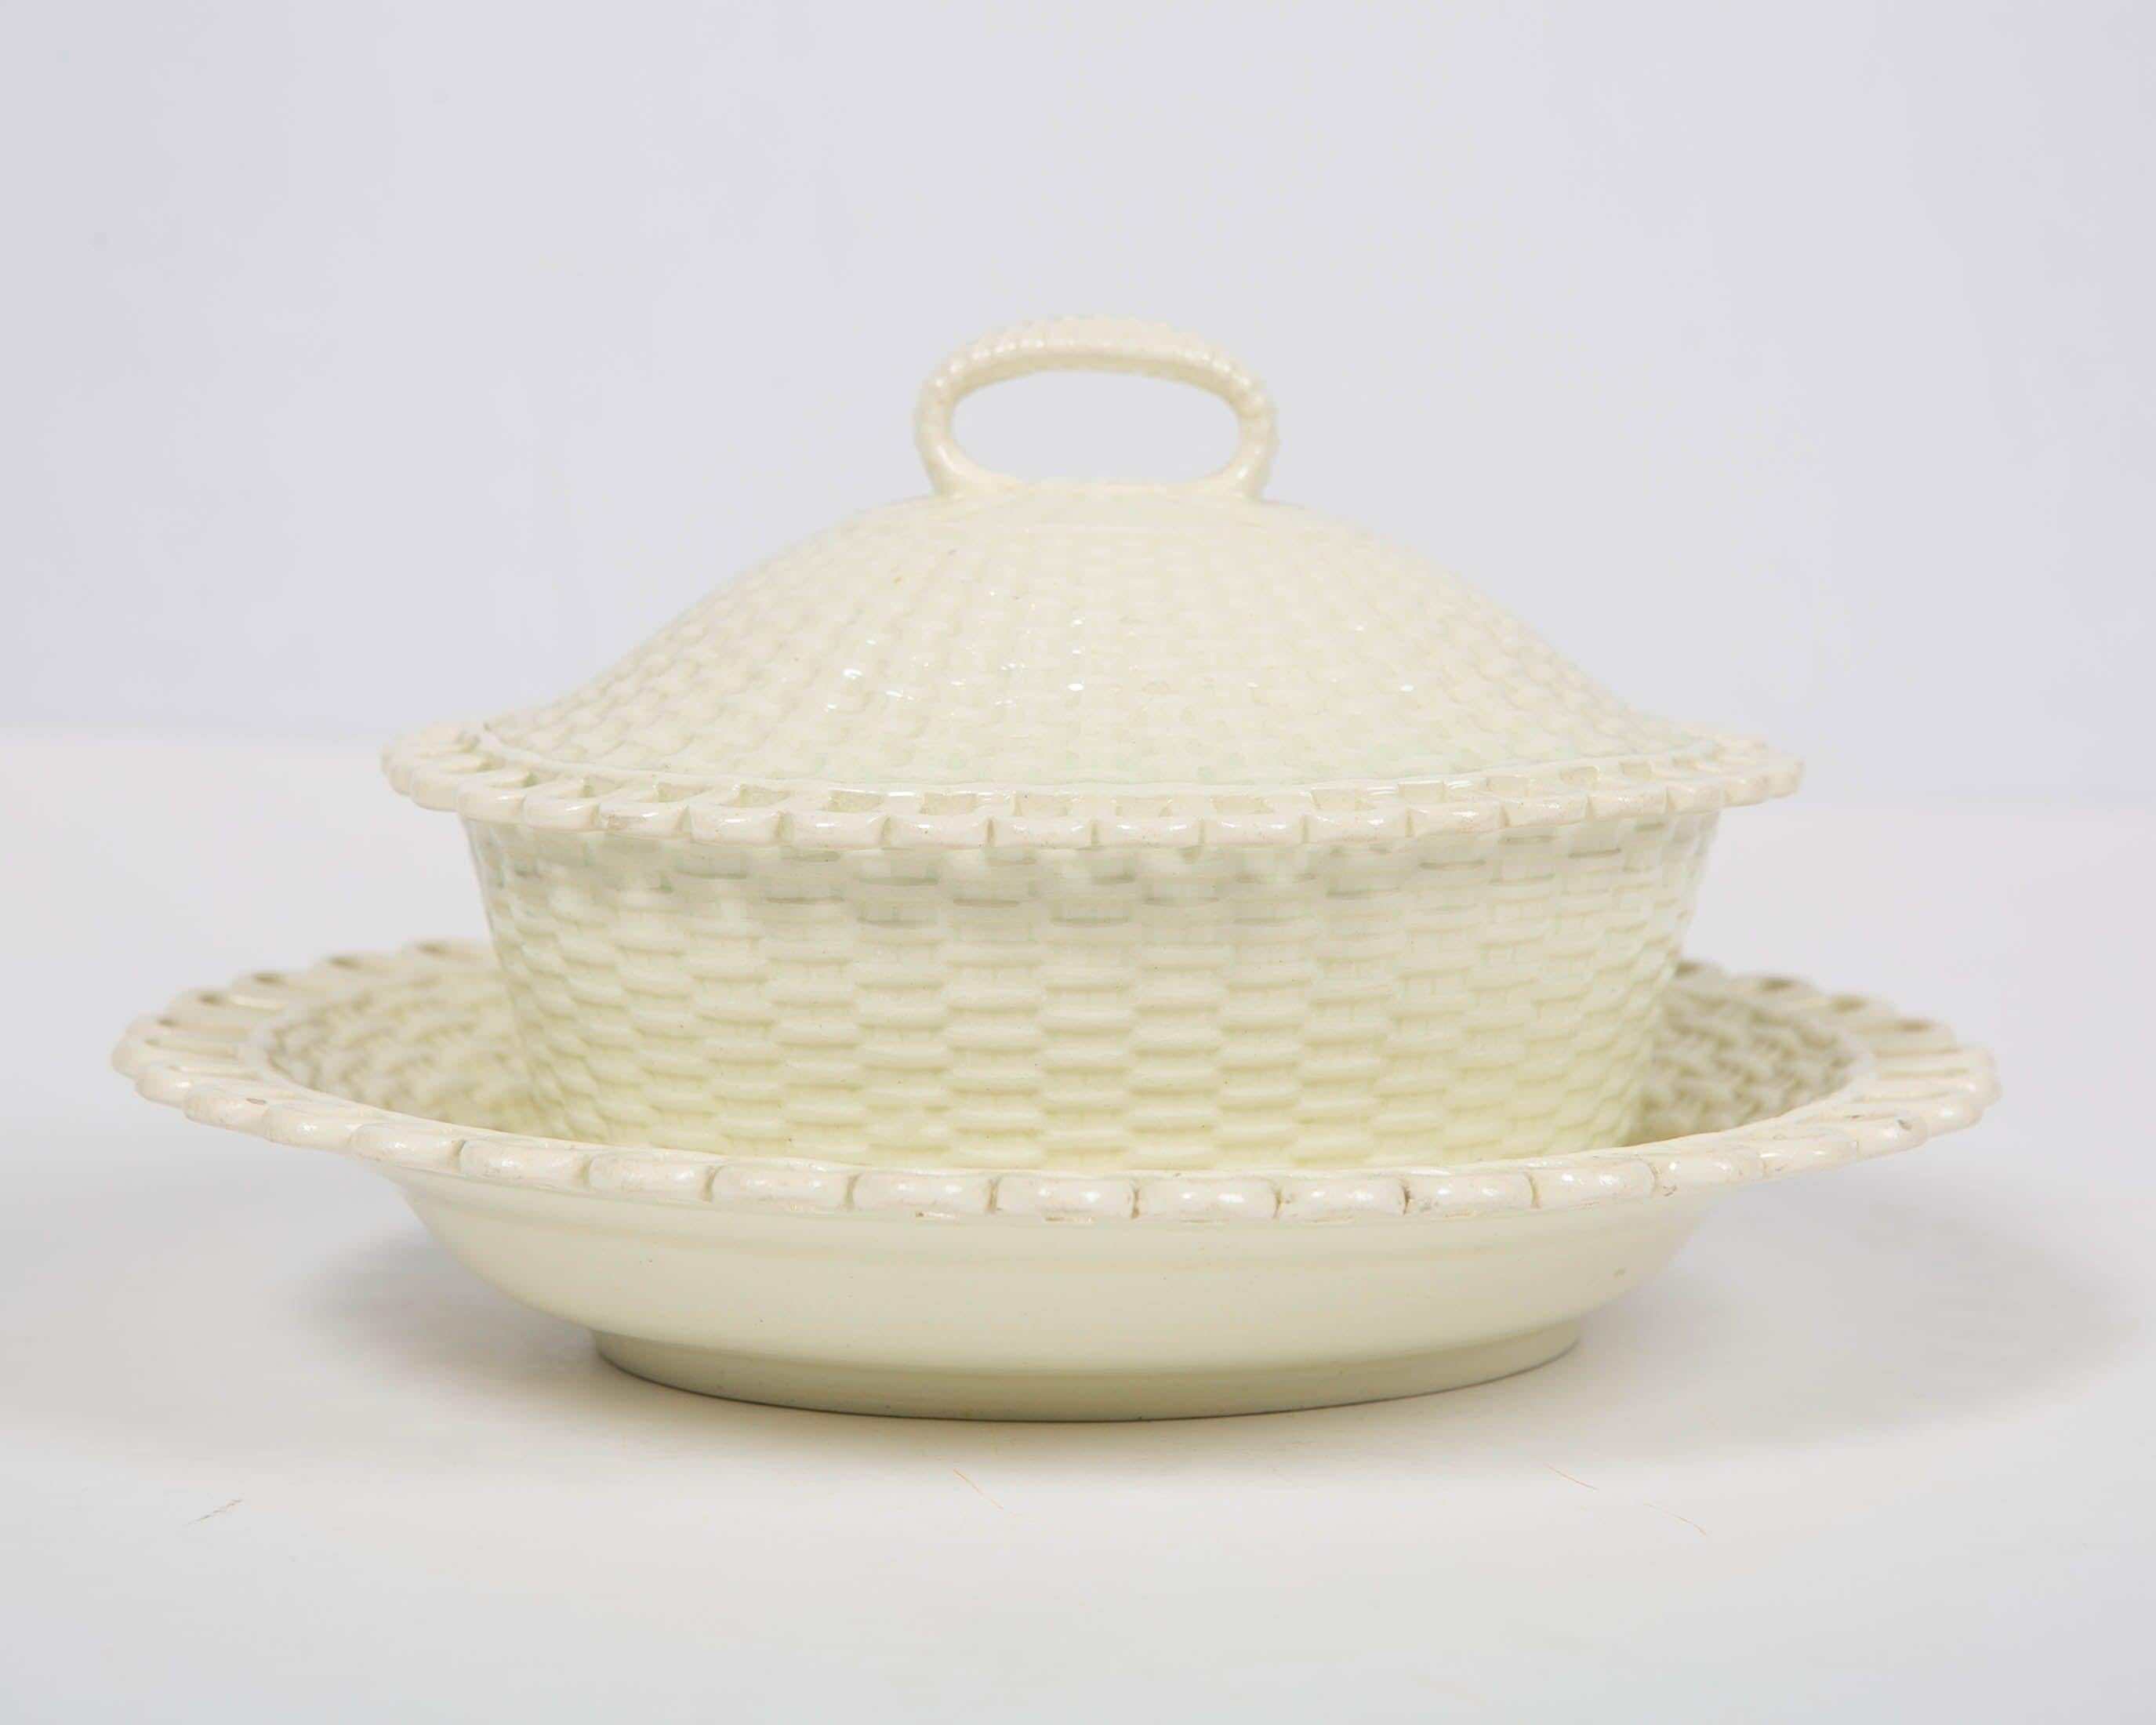 Why we love it: The creamy color and the pure beauty of the decoration
We are pleased to offer this 18th century English creamware sauce tureen and stand decorated with an impressed basketweave pattern and lovely weave of delicate